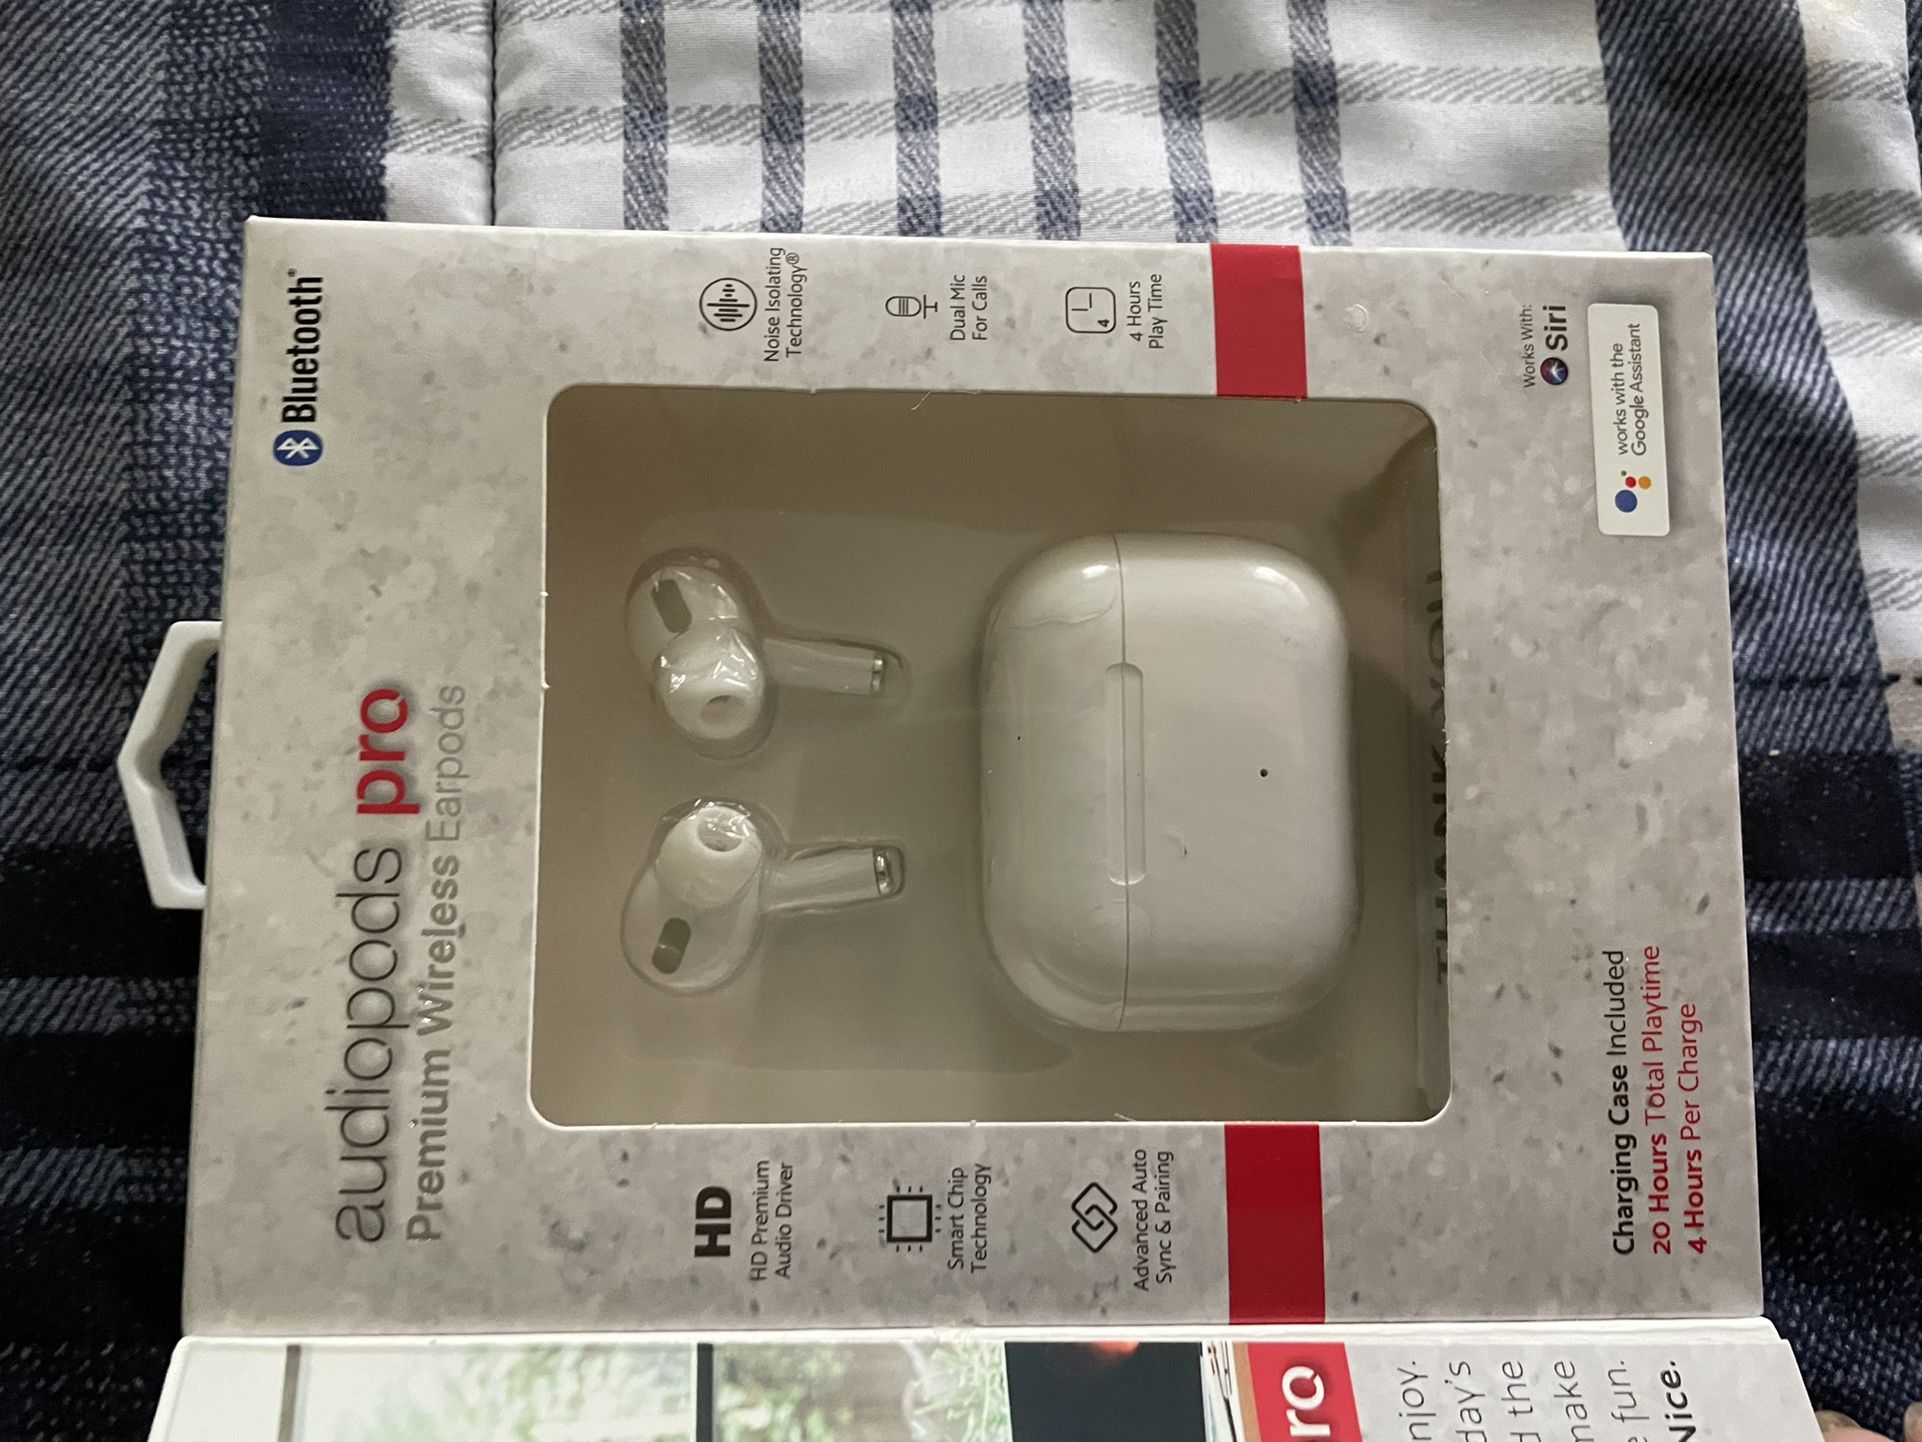 Bluetooth Earbuds - Cheap-  White  $5 wiling take $3